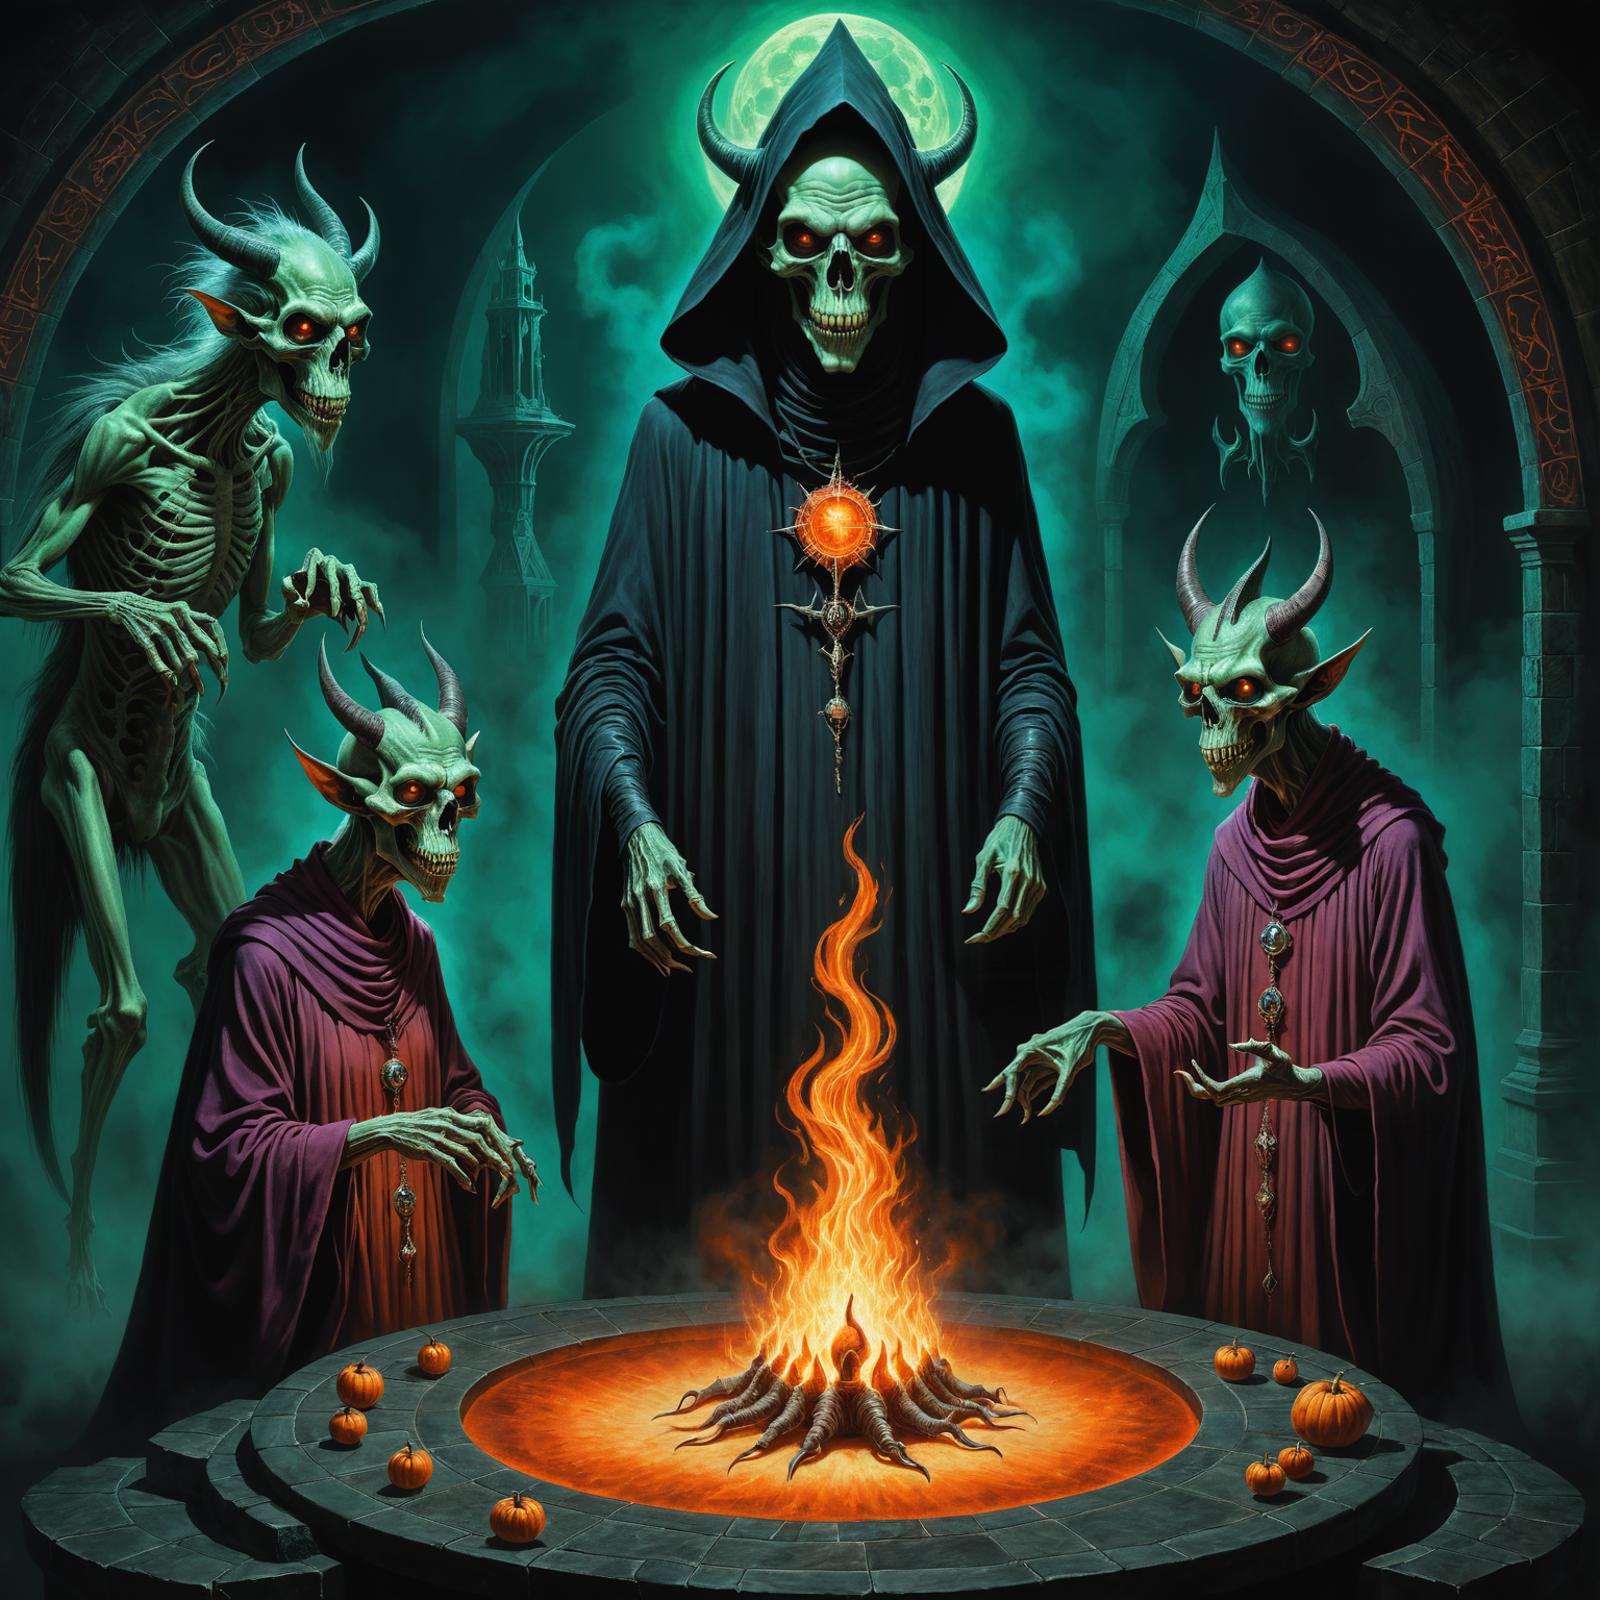 A demonic scene with a man and two skeletons around a fire pit.